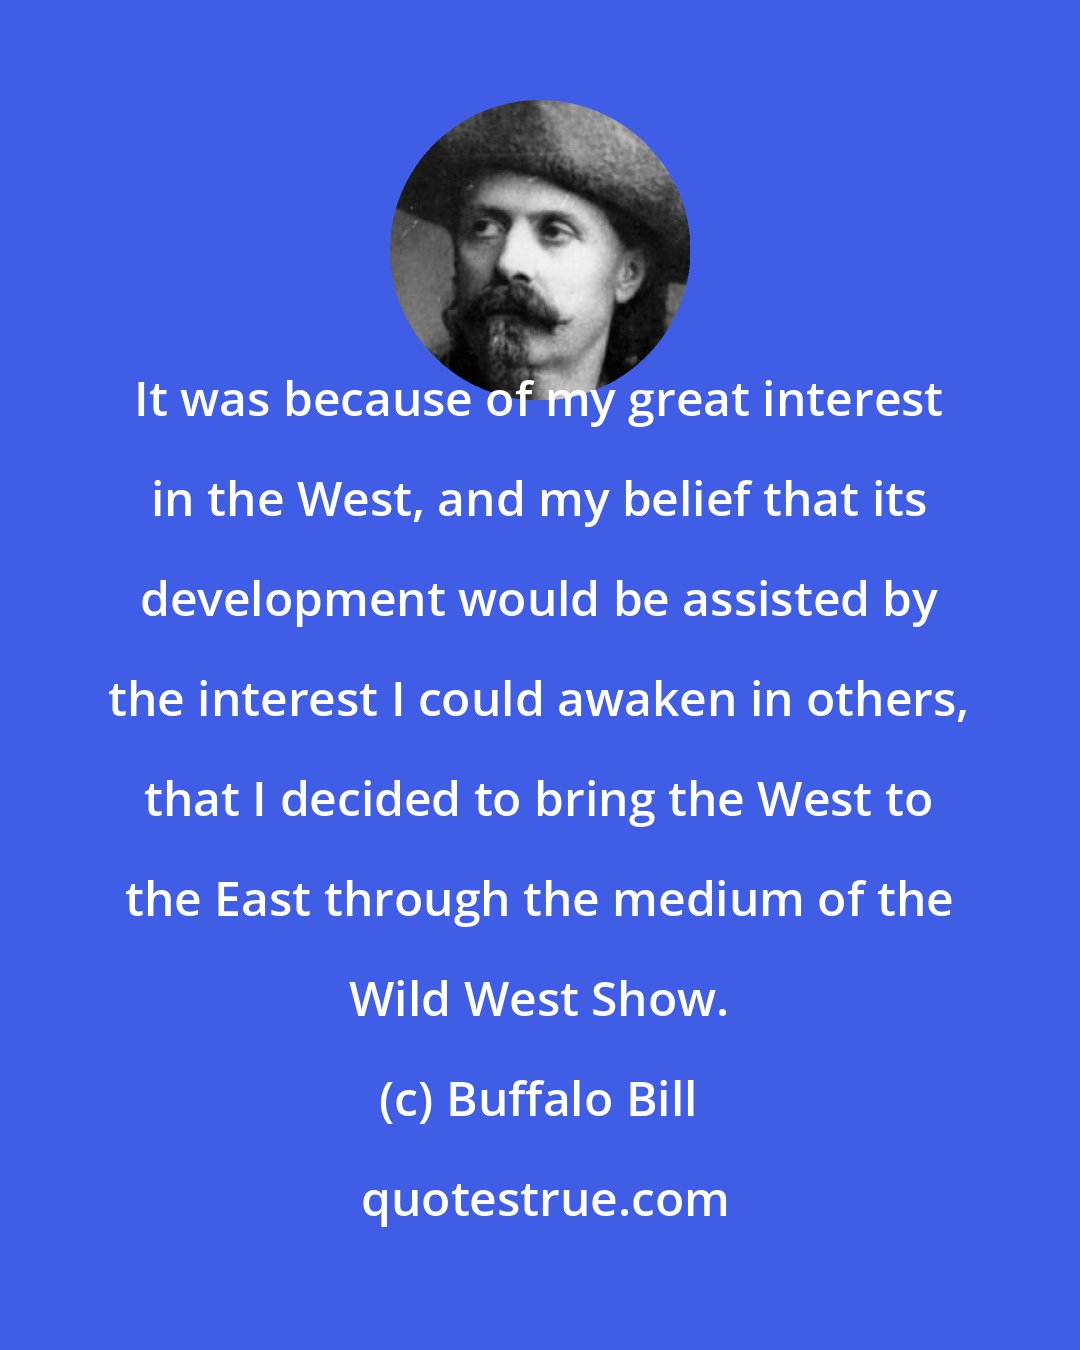 Buffalo Bill: It was because of my great interest in the West, and my belief that its development would be assisted by the interest I could awaken in others, that I decided to bring the West to the East through the medium of the Wild West Show.